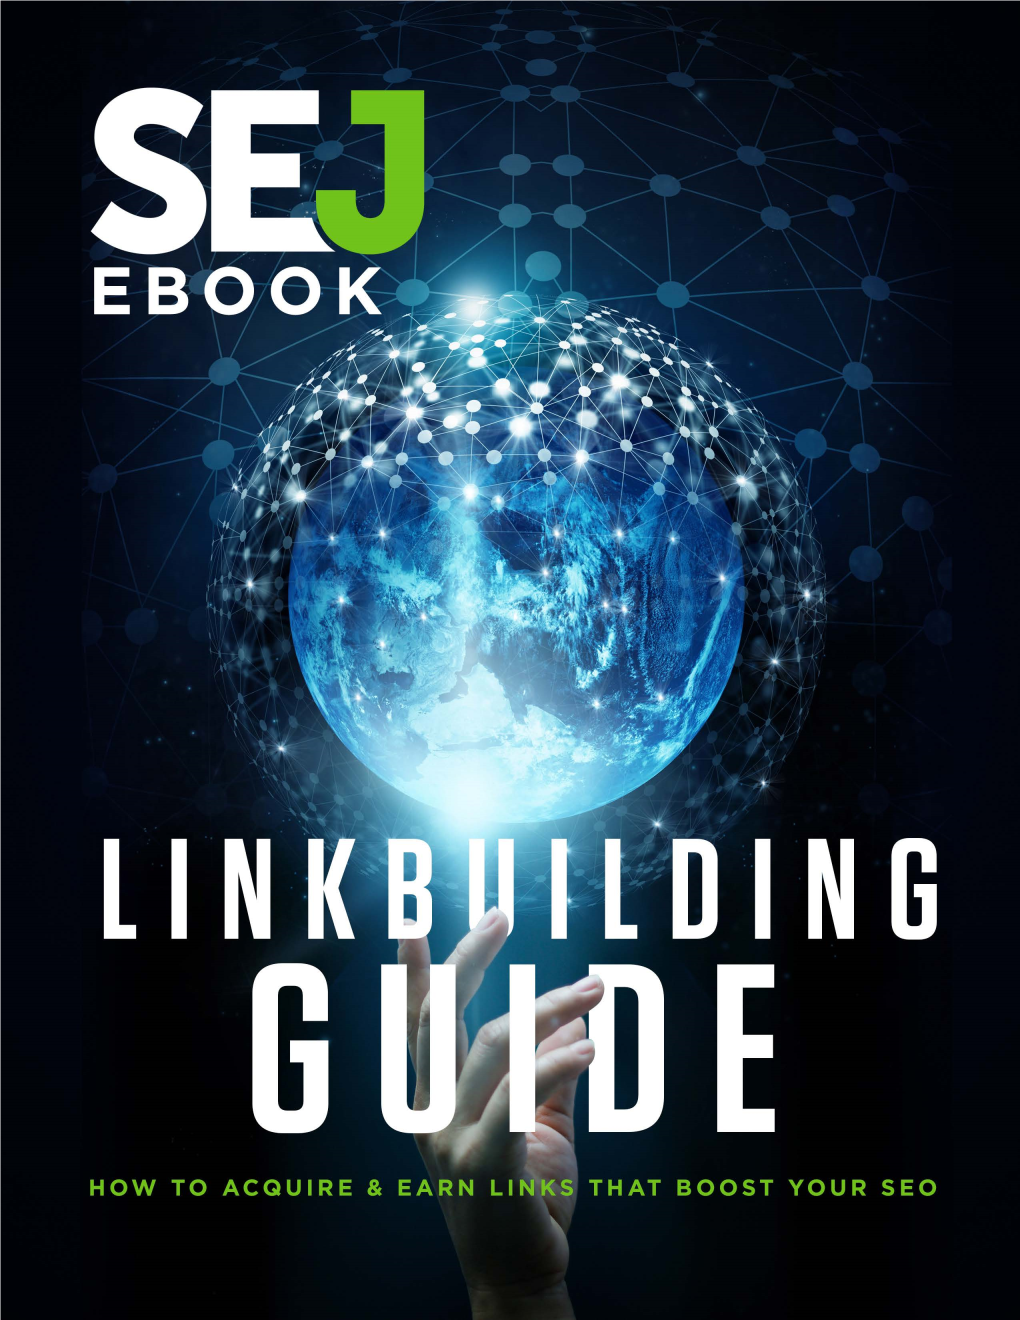 Link Building Guide So Far, with Tasks Broken Down by Month and Week